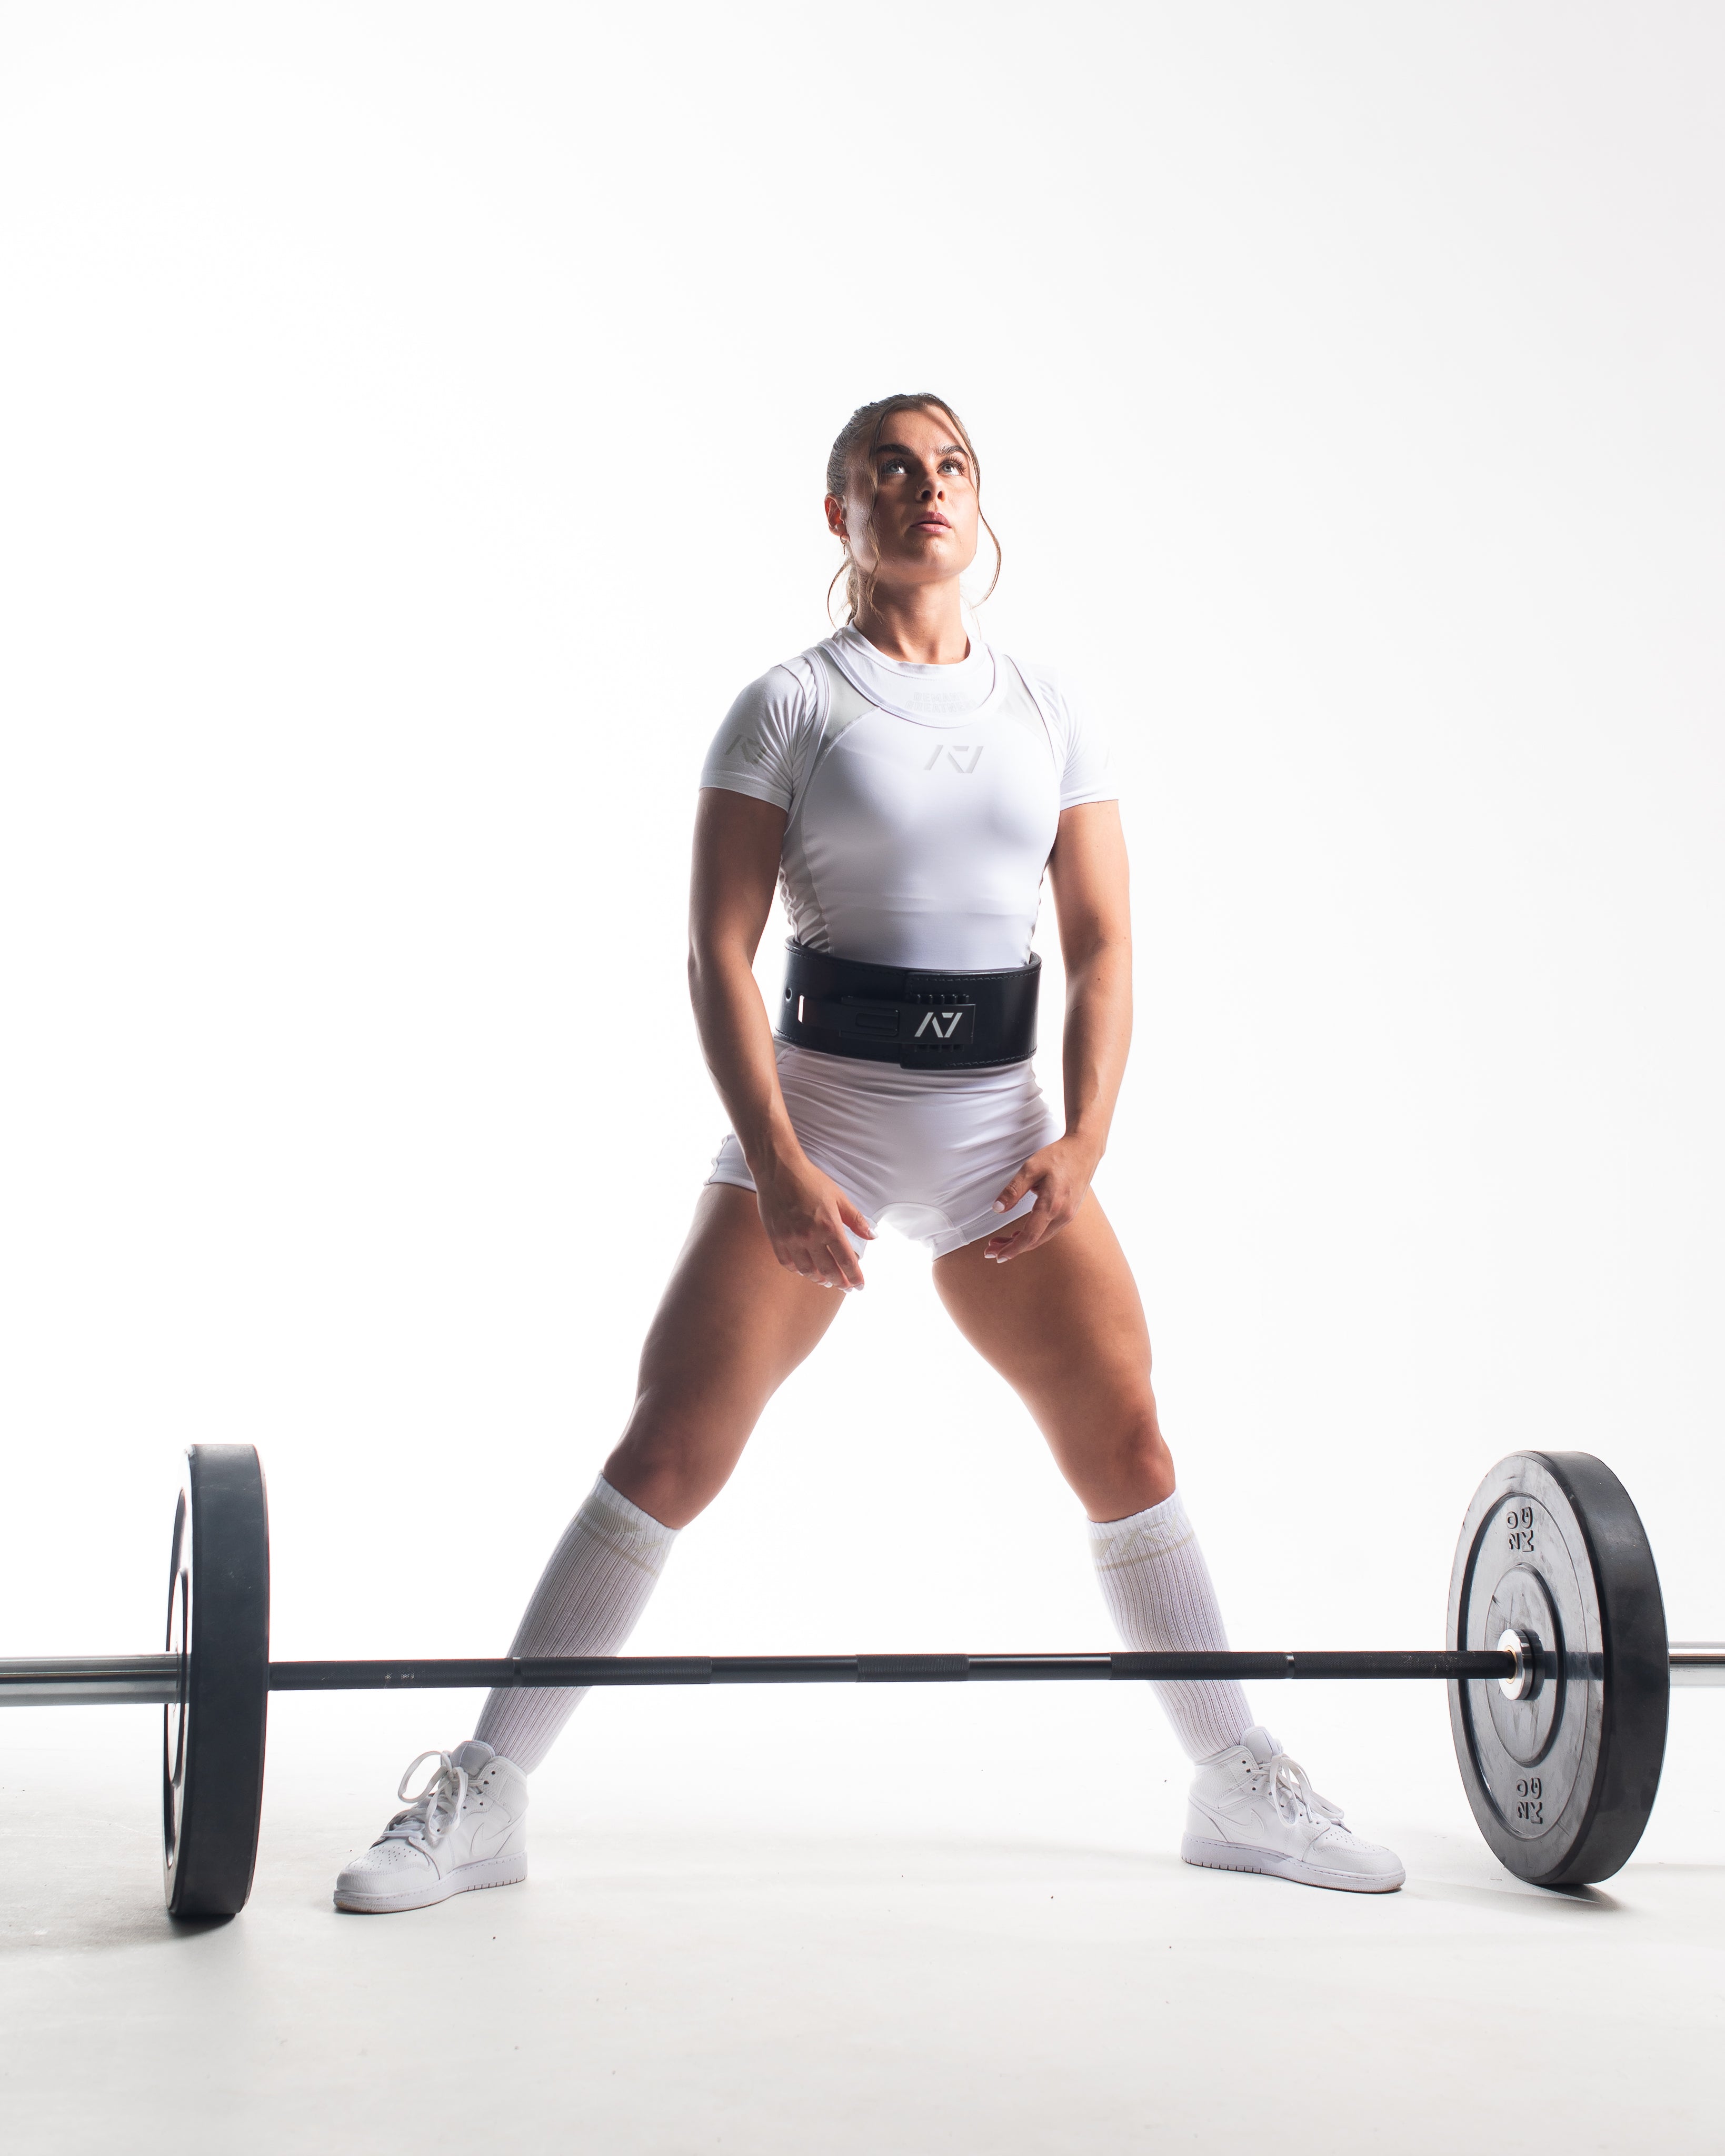 A7 IPF Approved Polar Luno singlet with extra lat mobility, side panel stitching to guide the squat depth level and curved panel design for a slimming look. The Women's cut singlet features a tapered waist and additional quad room. The IPF Approved Kit includes Powerlifting Singlet, A7 Meet Shirt, A7 Zebra Wrist Wraps, A7 Deadlift Socks, Hourglass Knee Sleeves (Stiff Knee Sleeves and Rigor Mortis Knee Sleeves). Genouillères powerlifting shipping to France, Spain, Ireland, Germany, Italy, Sweden and EU. 